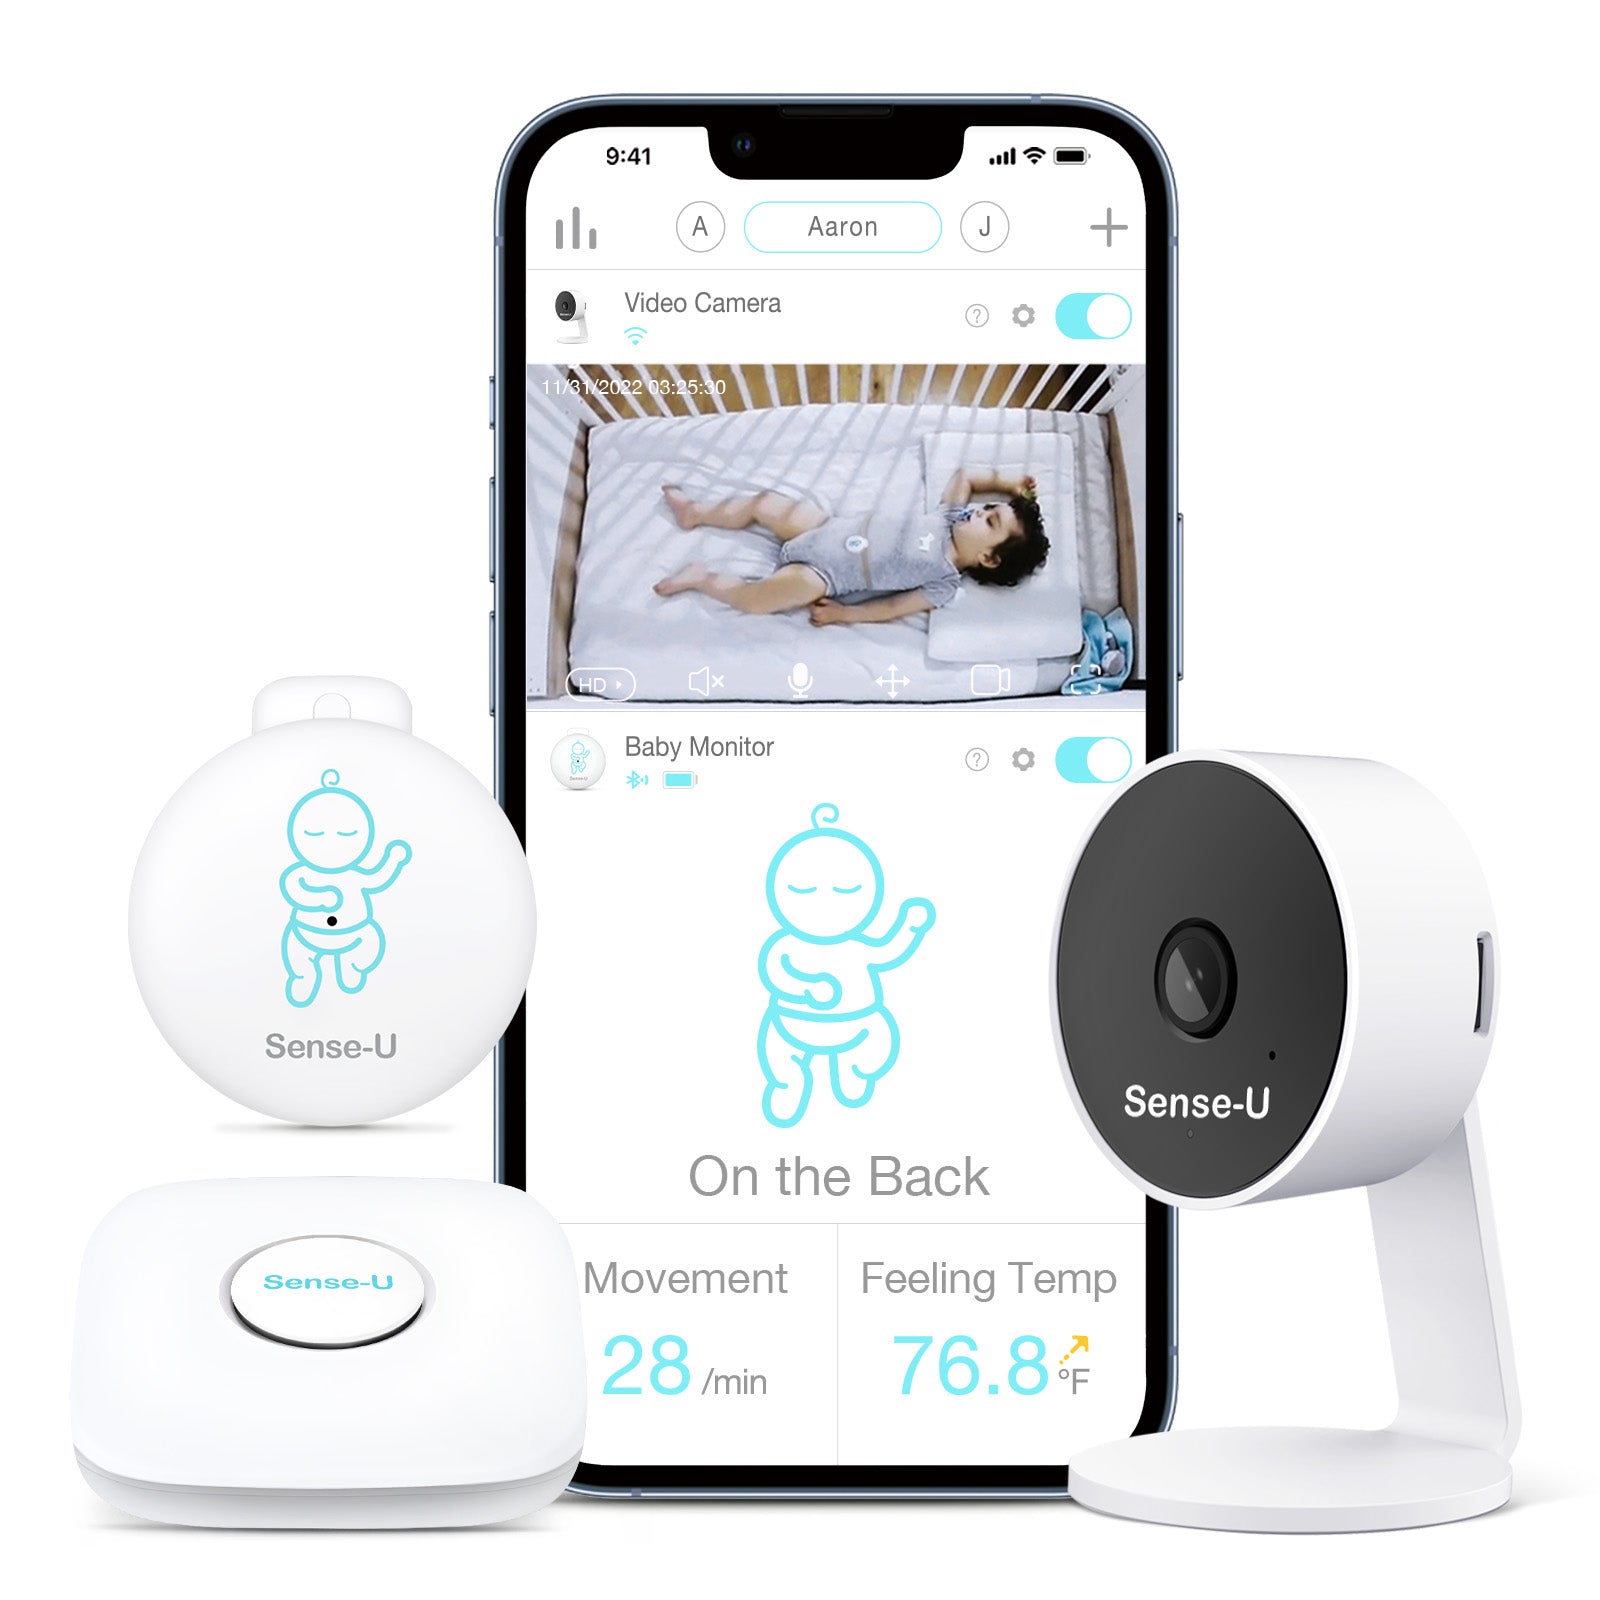 Refurbished Sense-U Baby Monitor: Tracks your baby's sleep while streaming HD video to your smartphone, anytime, anywhere.